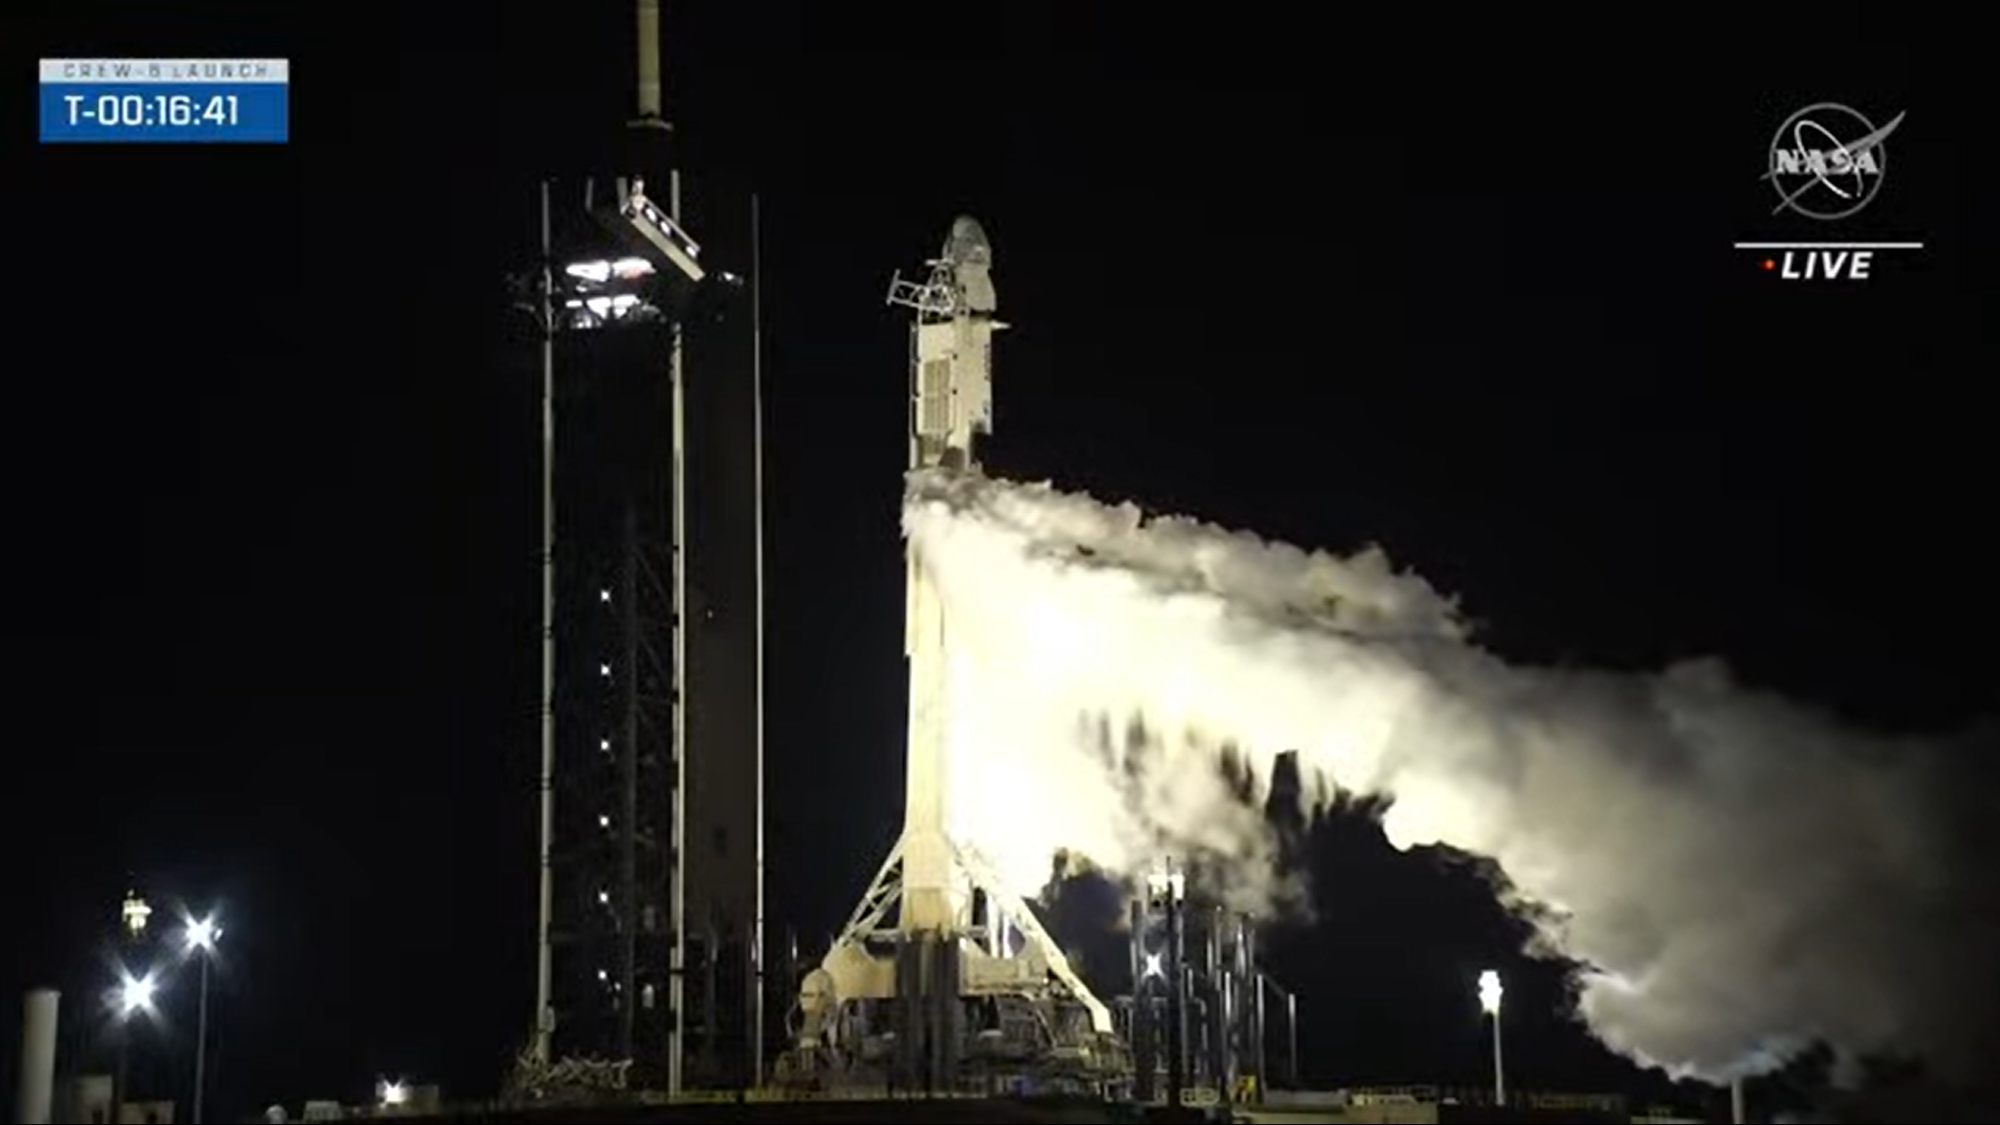 SpaceX's Falcon 9 rocket vents as it is fueled for launch of four astronauts on the Crew-6 mission for NASA